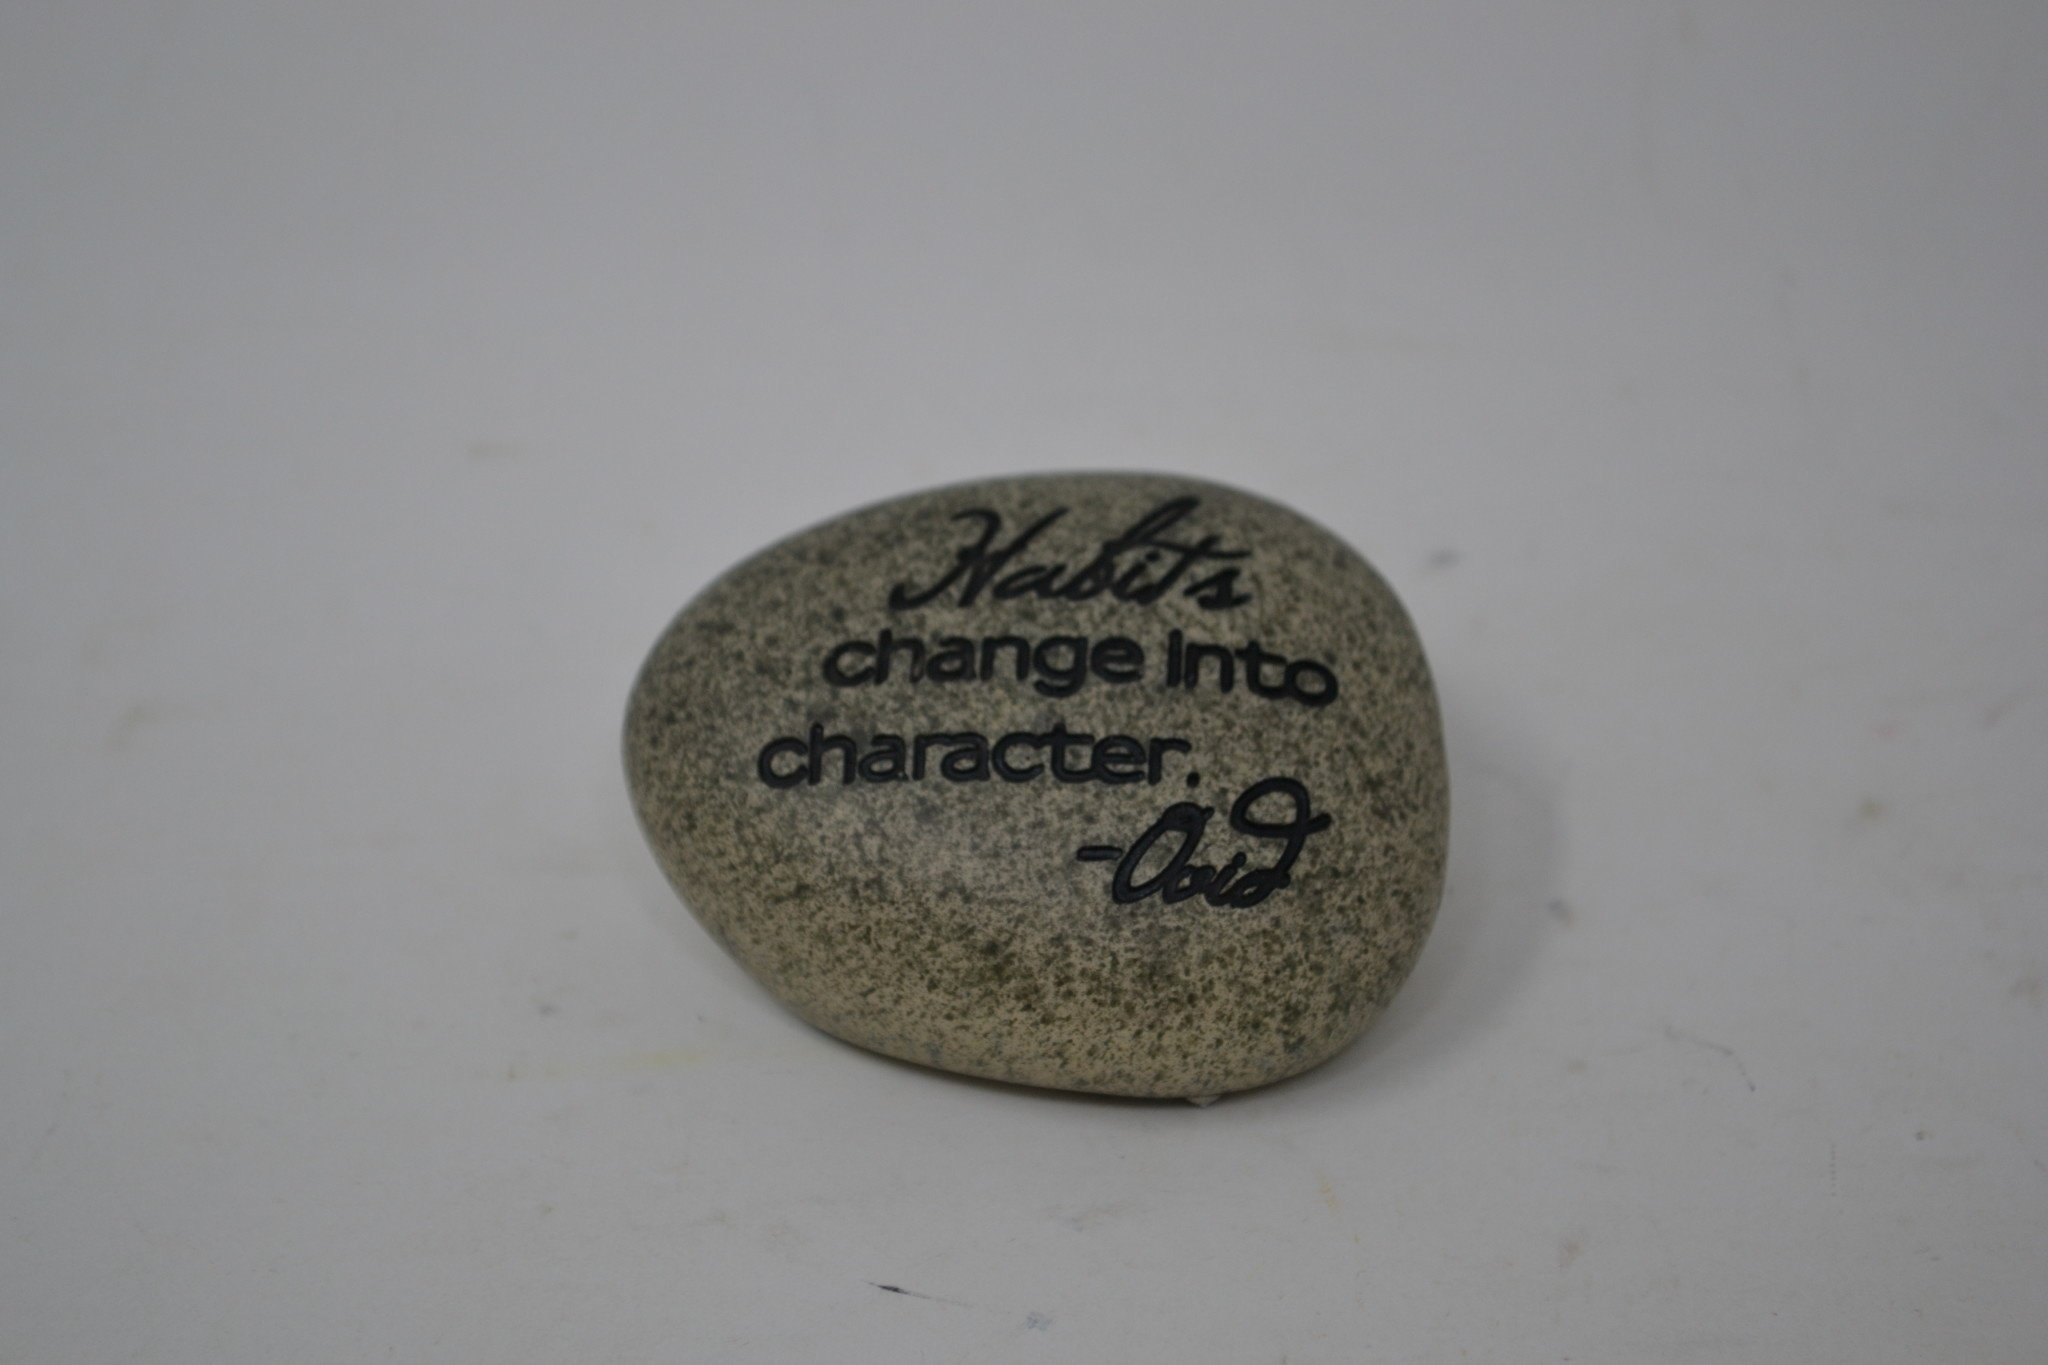 Mini Speckled Message Stone (8 Styles)